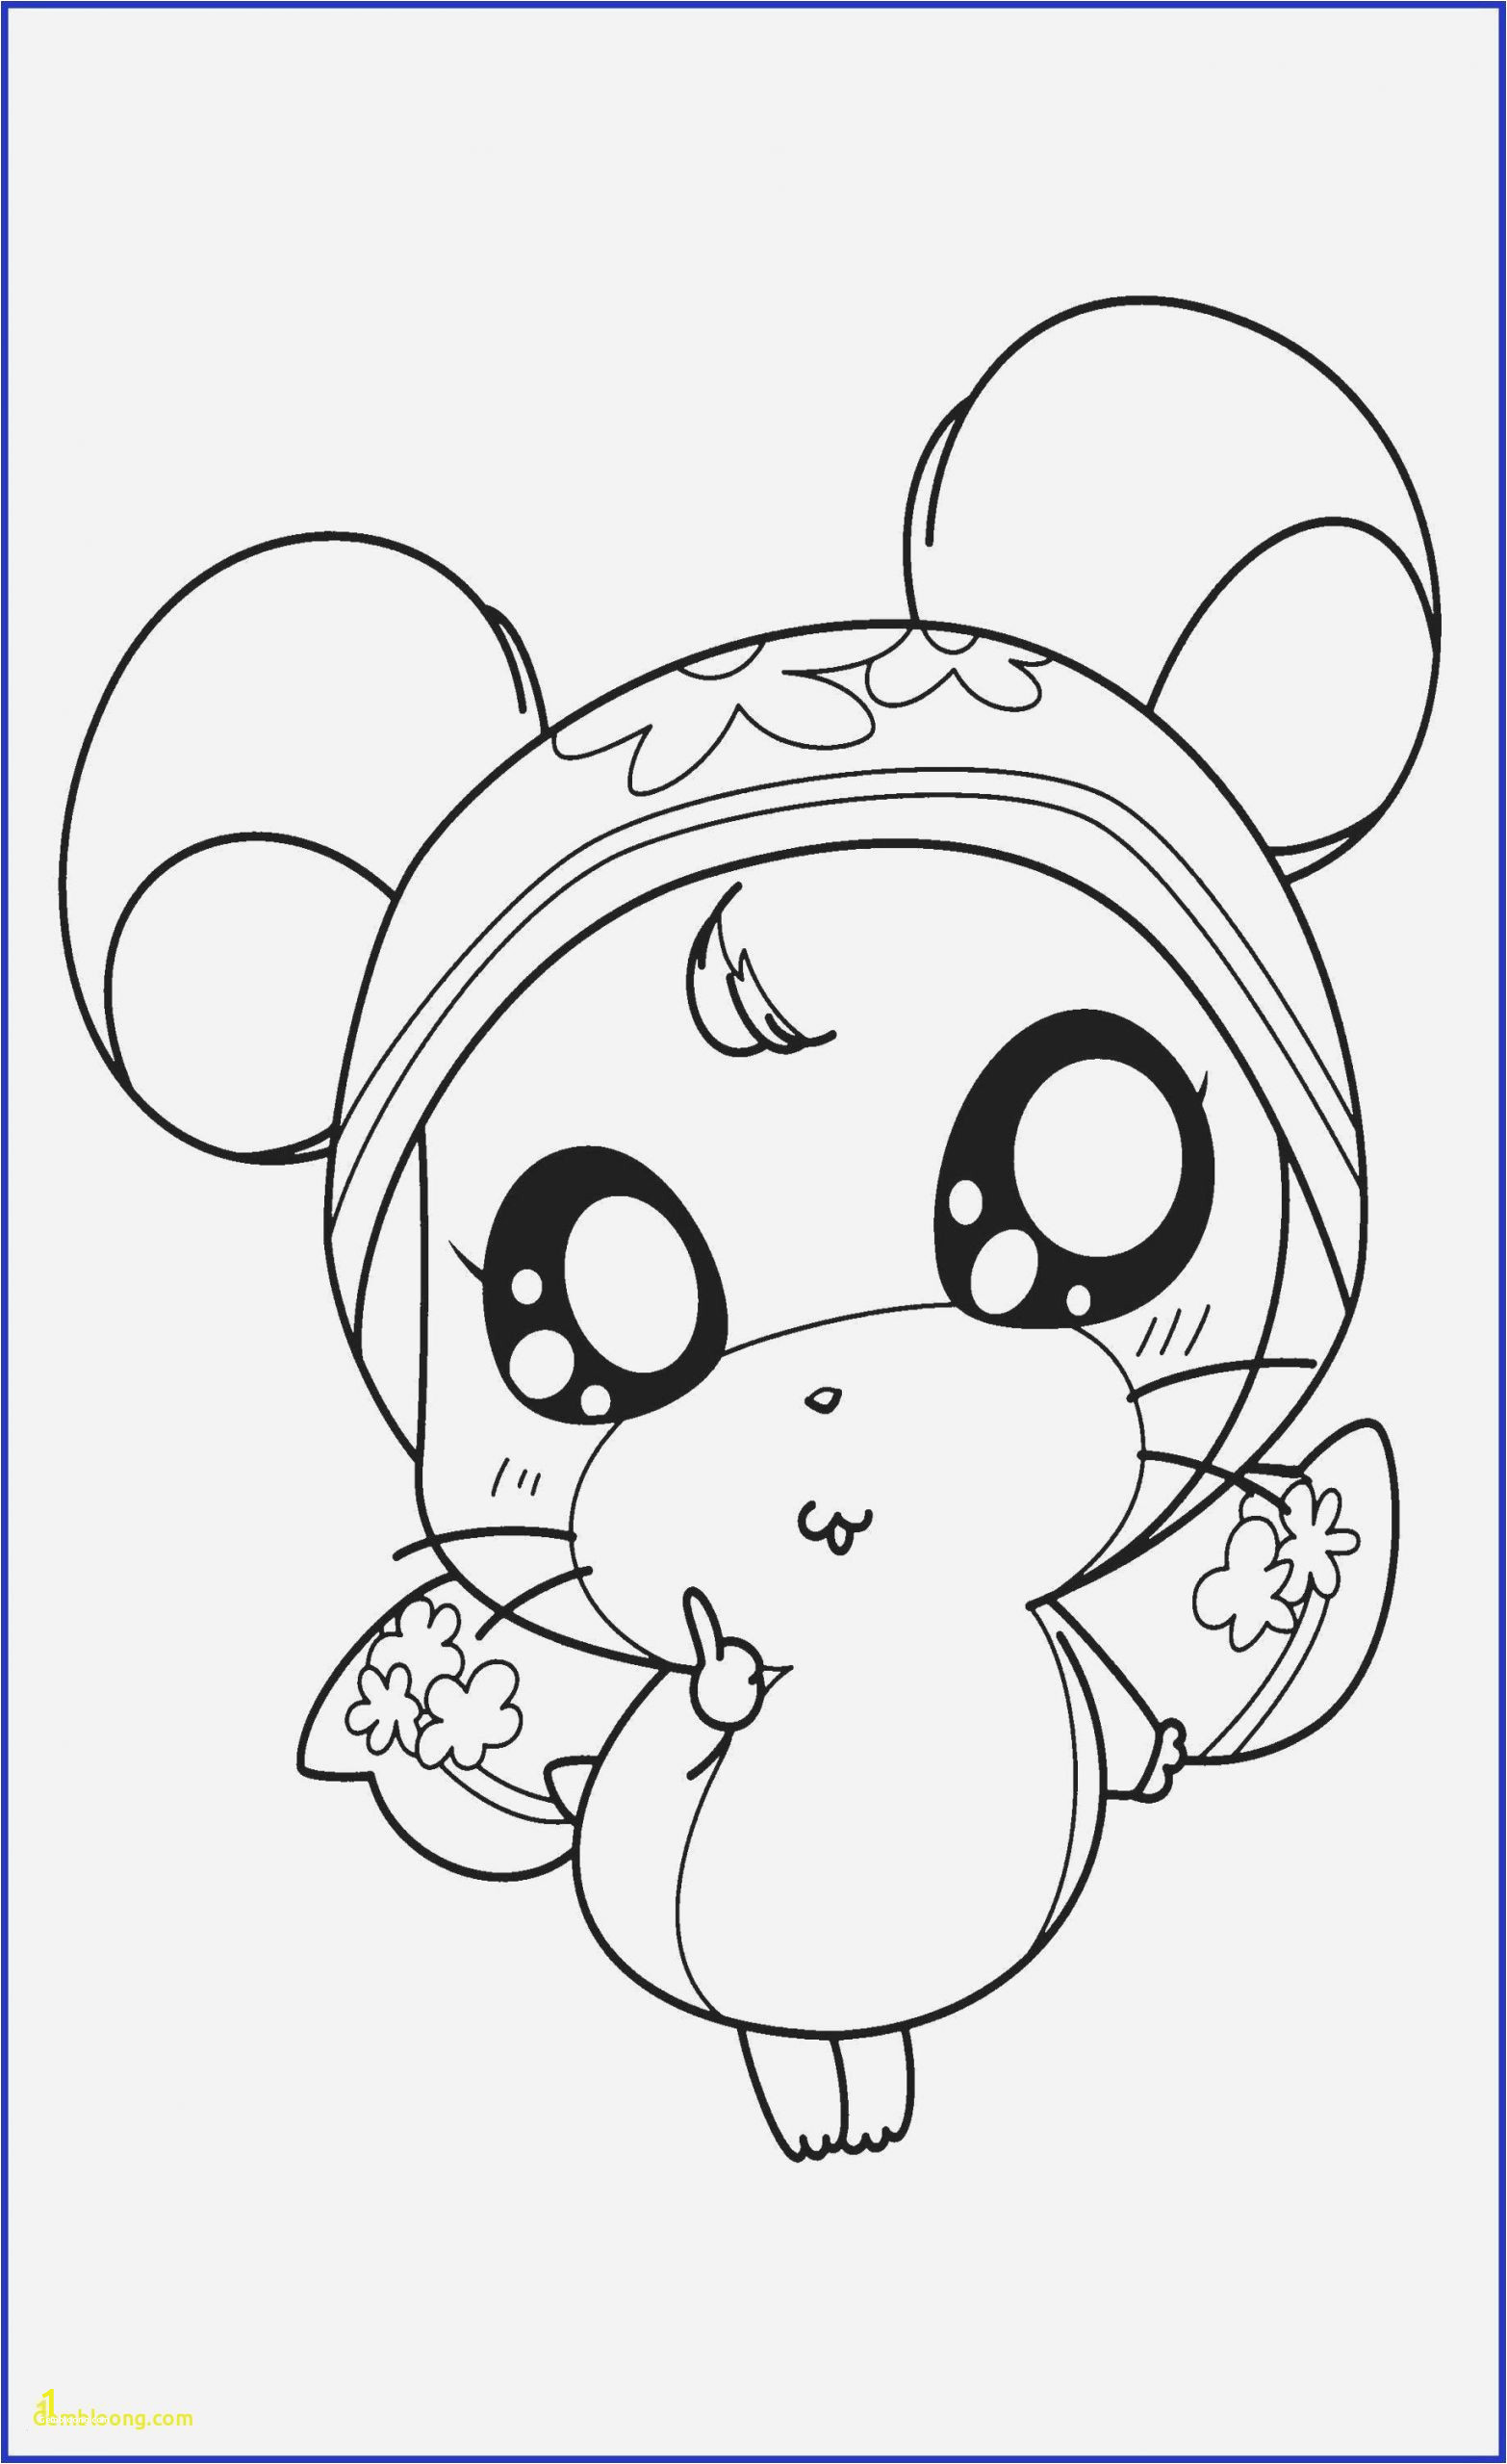 hello kitty mermaid coloring pages unique coloring pages cartoon coloring pages printable cartoon of hello kitty mermaid coloring pages